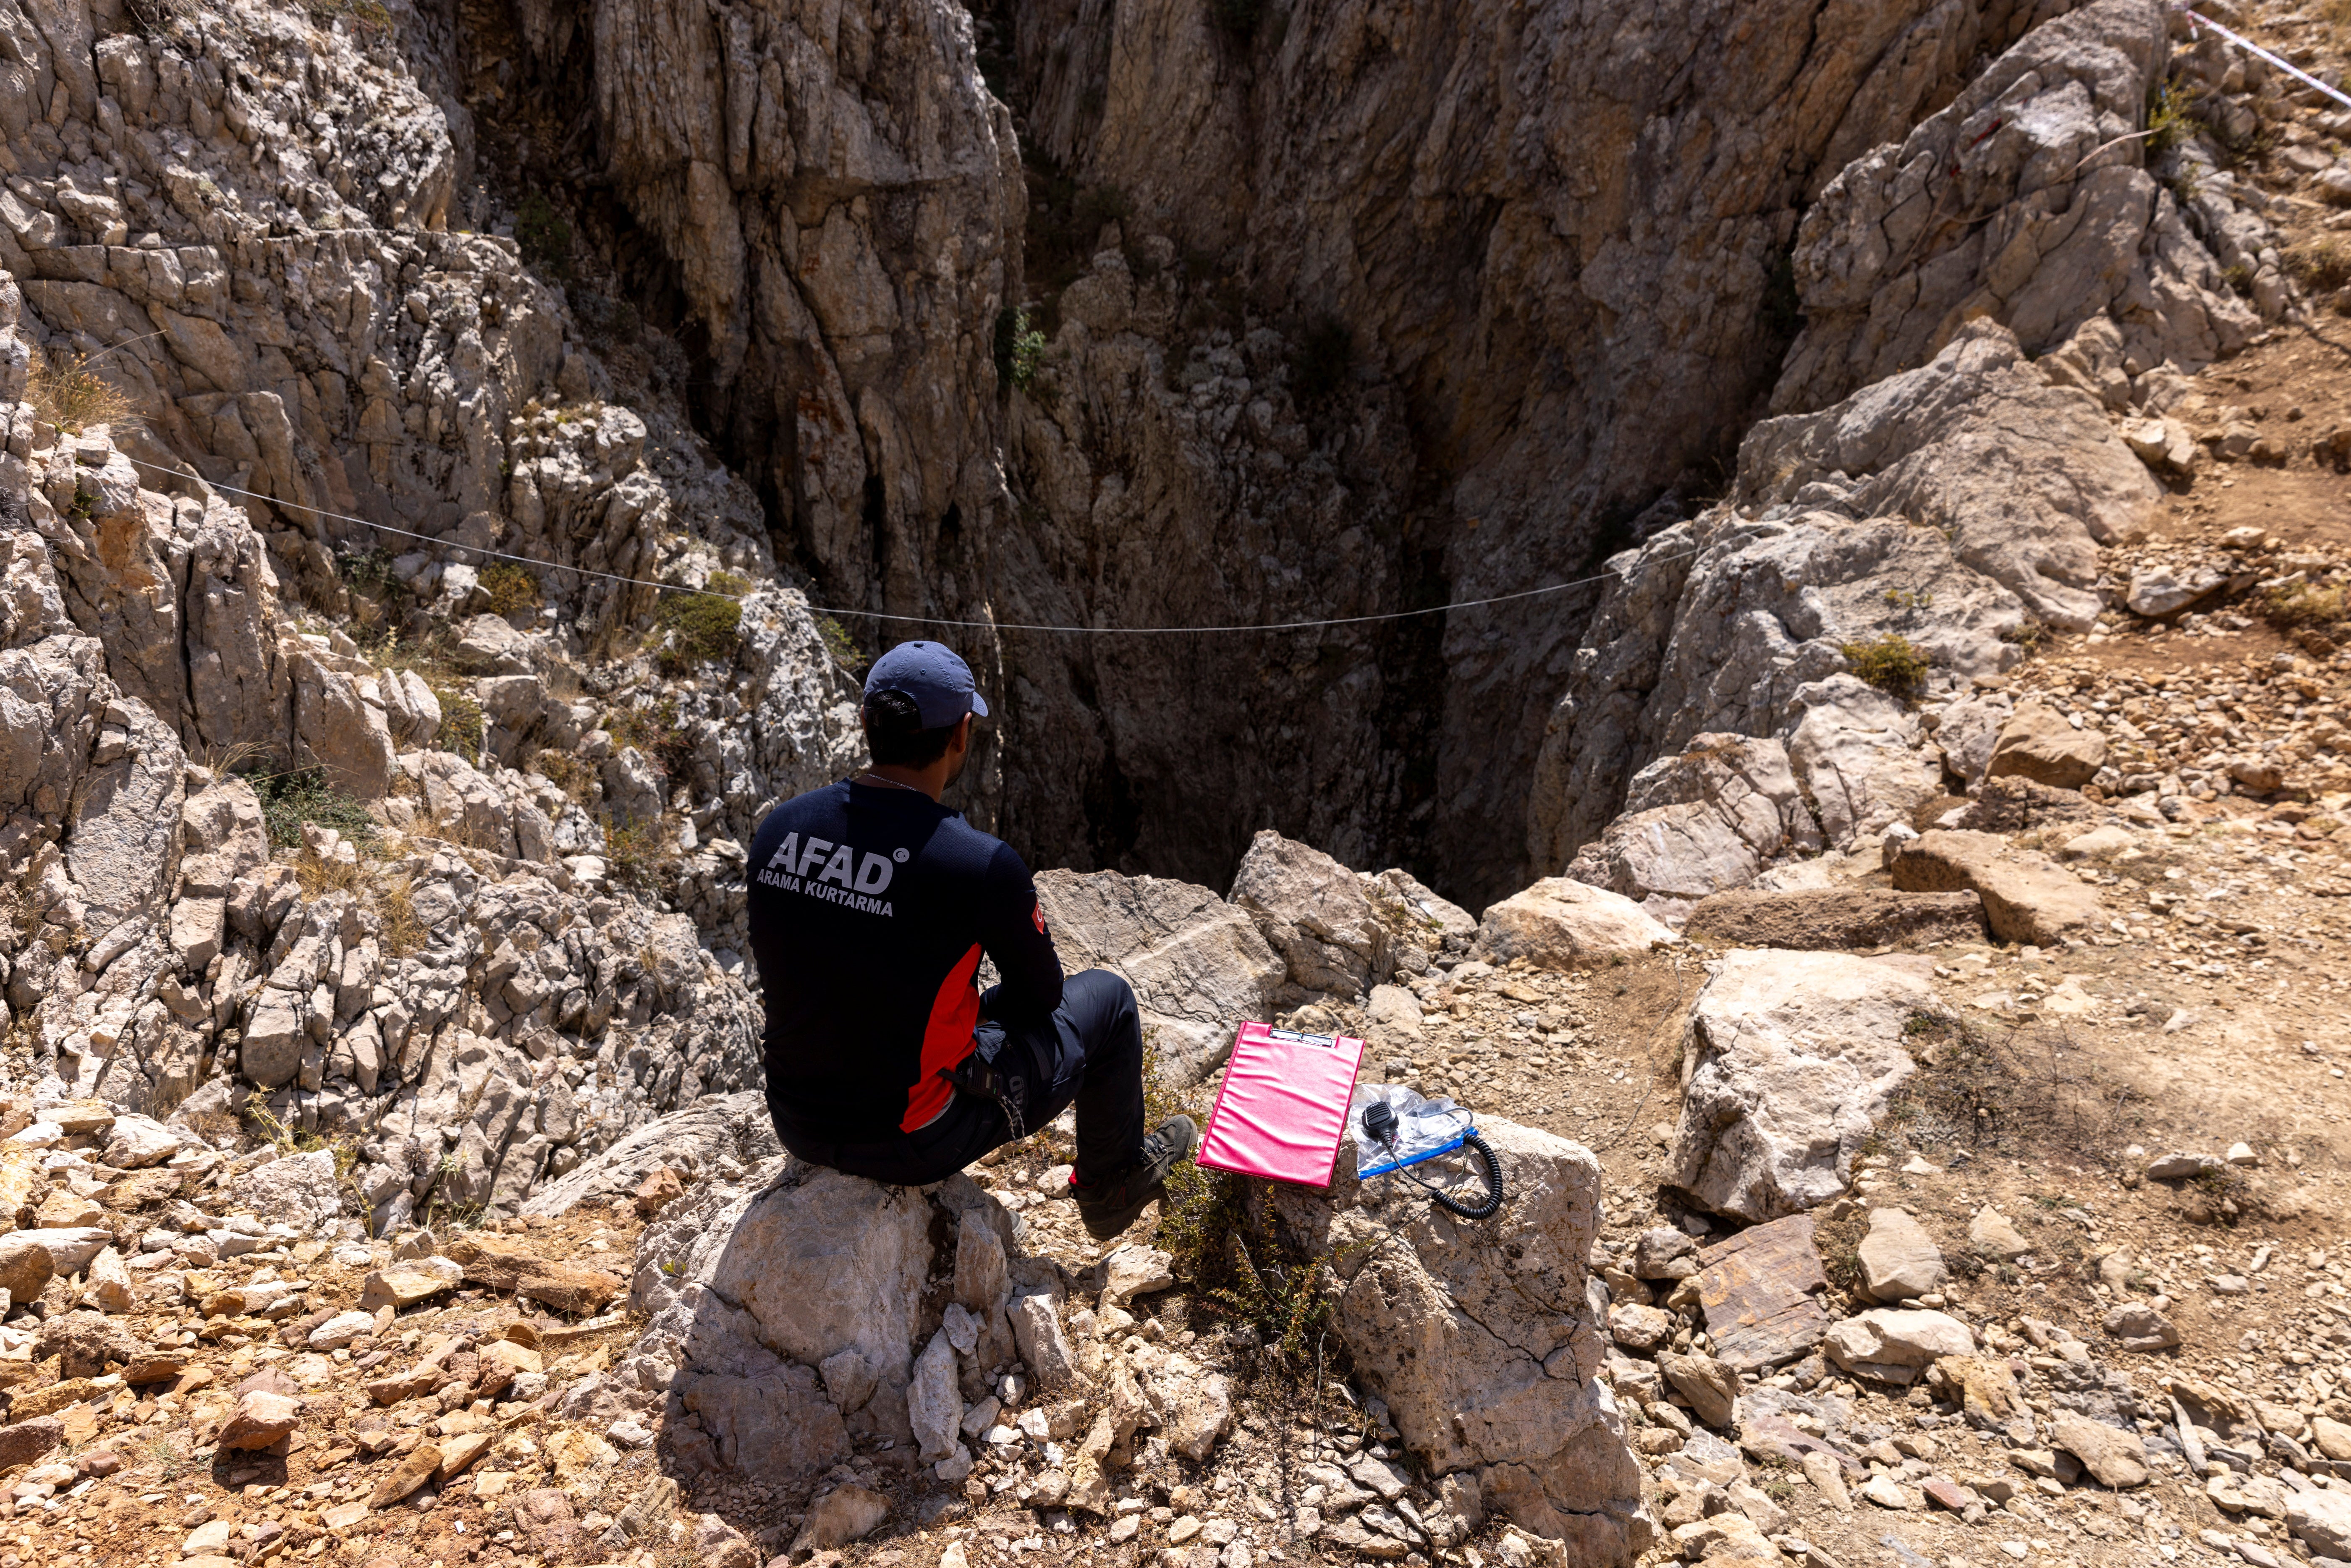 A rescuer is seen at the entrance of Morca Cave